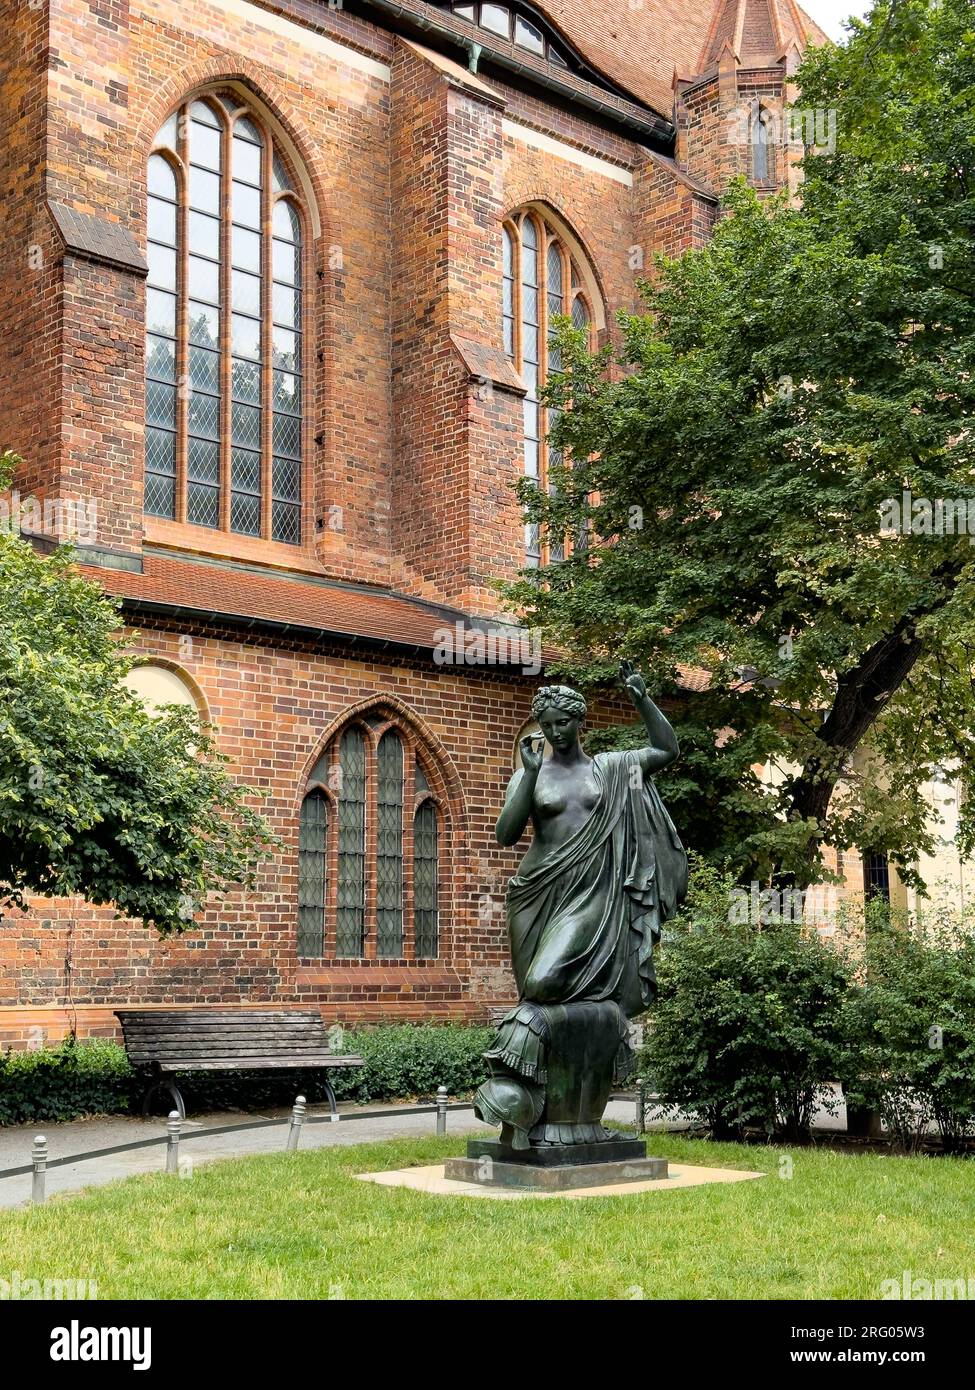 BERLIN, GERMANY - JULY 22, 2023: A classical statue in the garden of Nikolaikirche, also known as Nikolaikirche, also known as St. Nicholas Church in Stock Photo